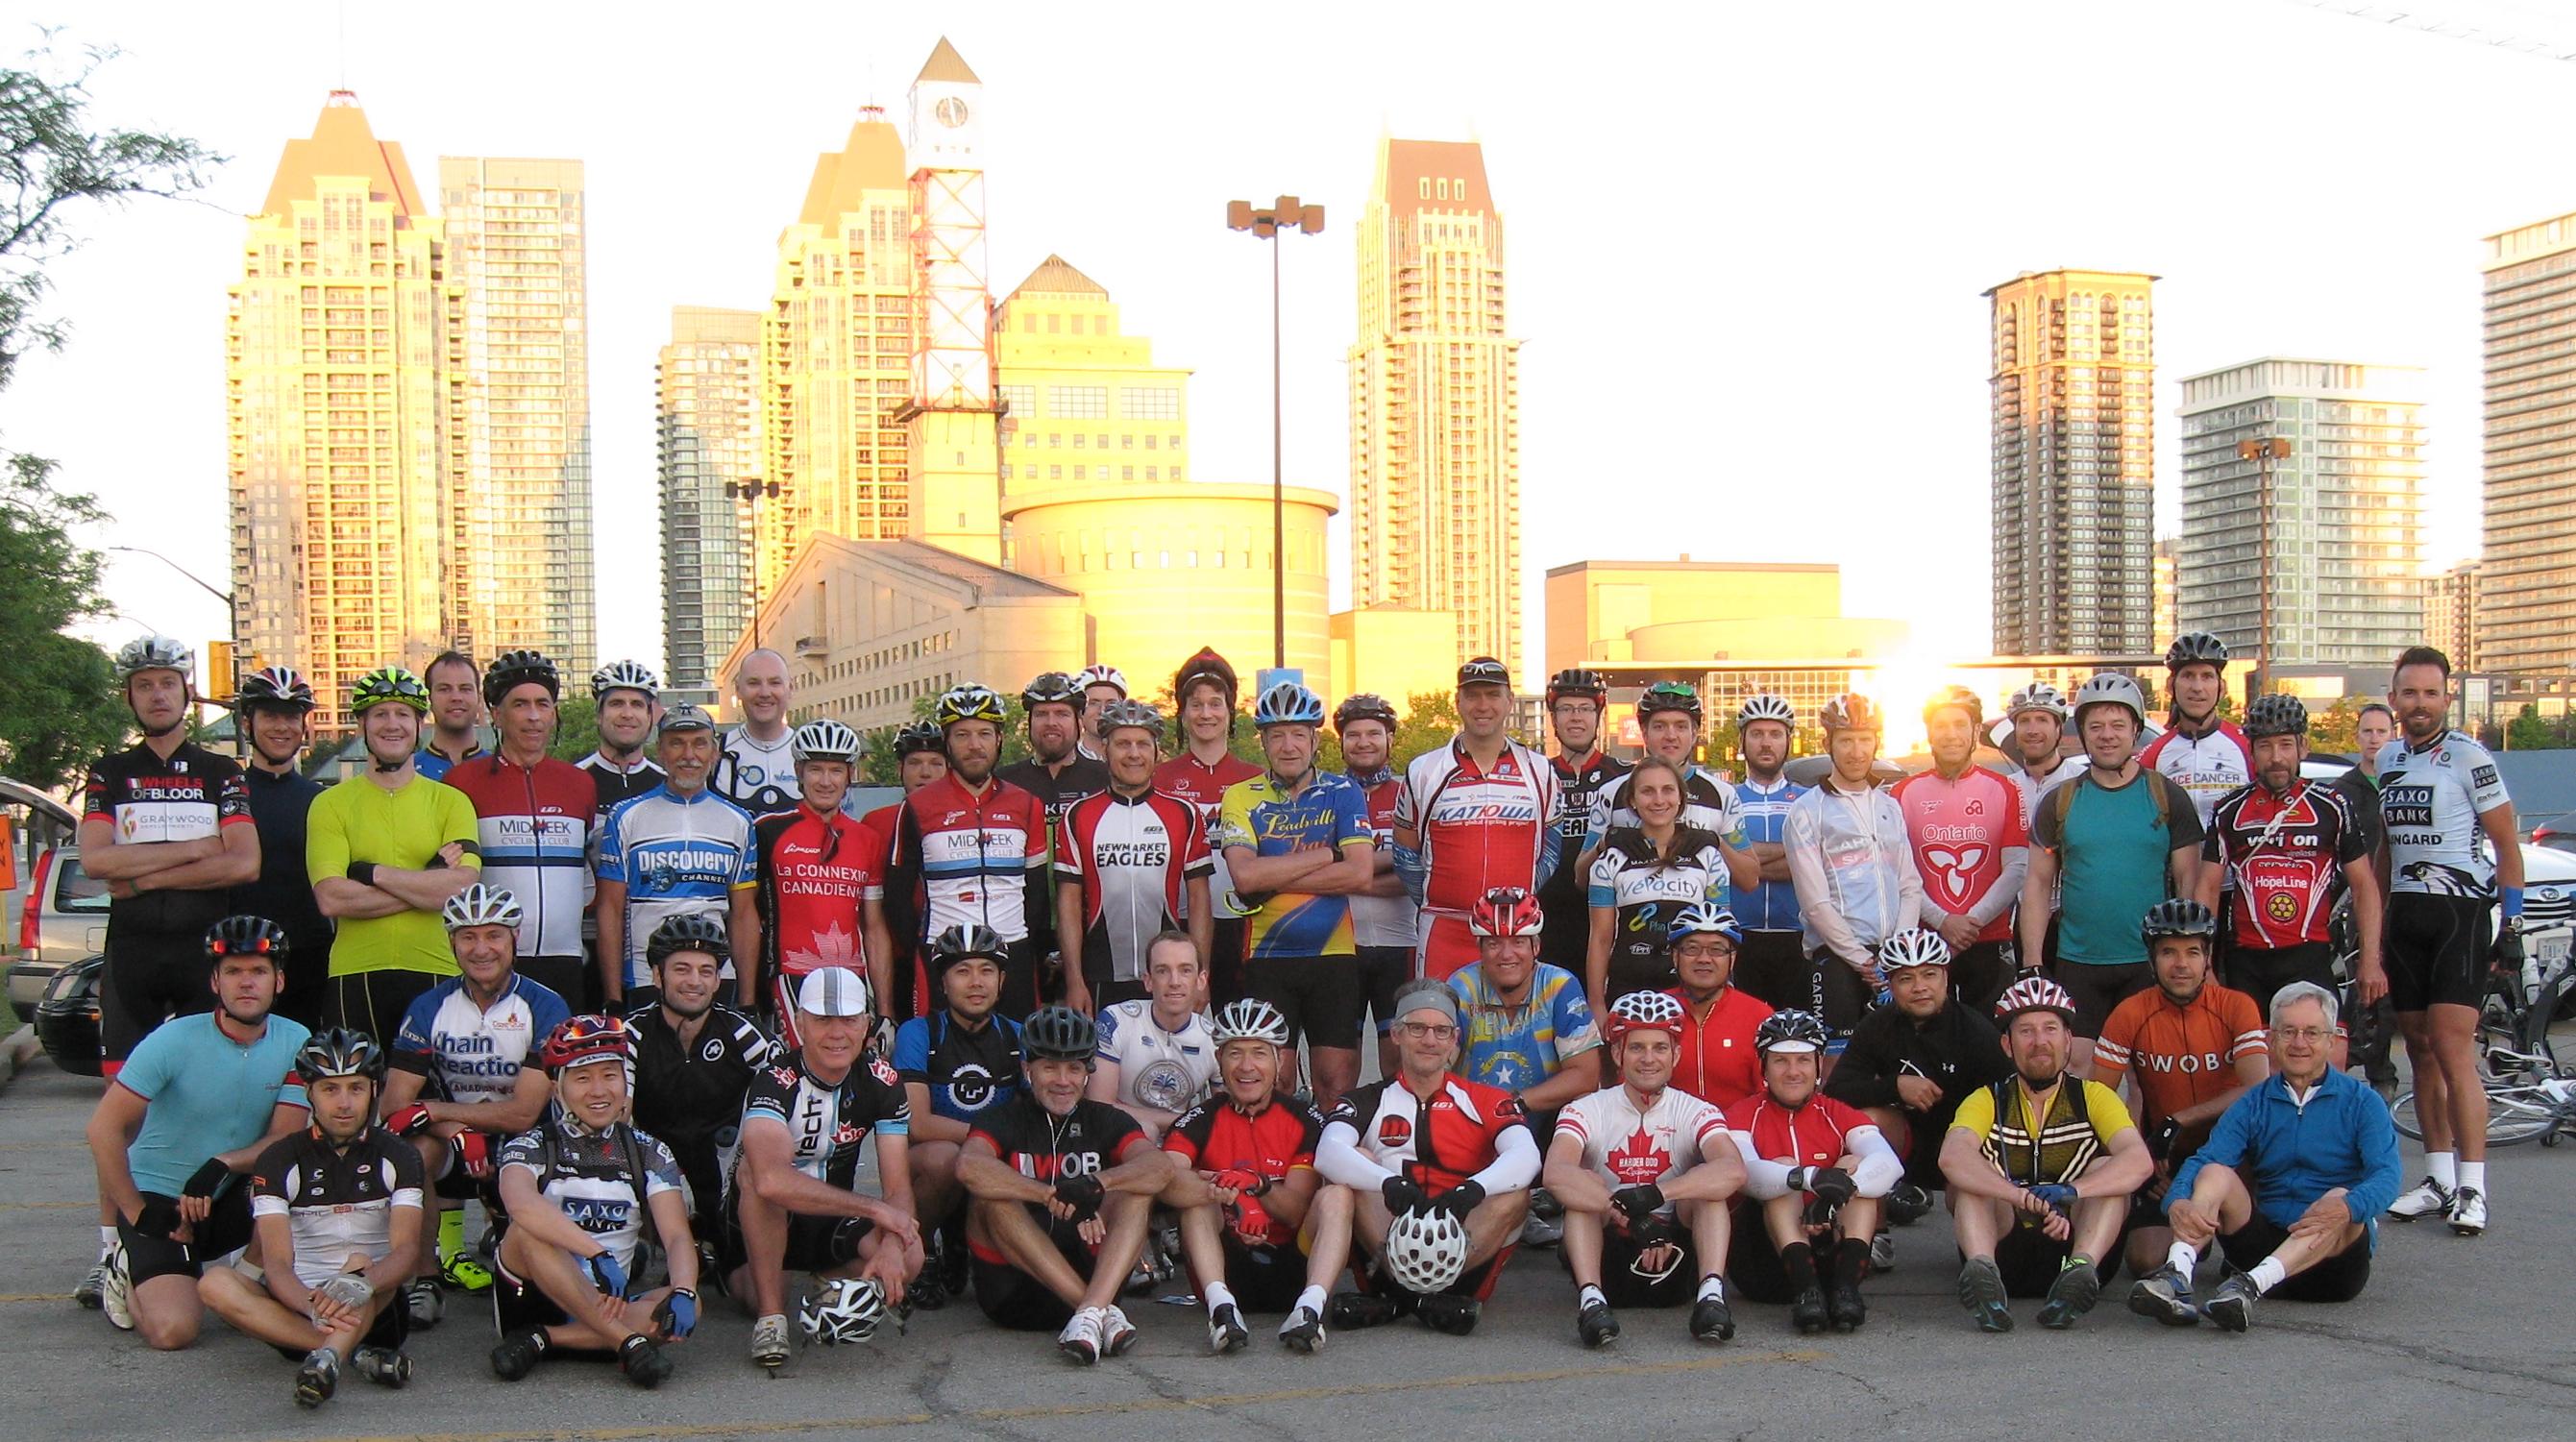 2014 group photo. Most of the starters are in the picture.